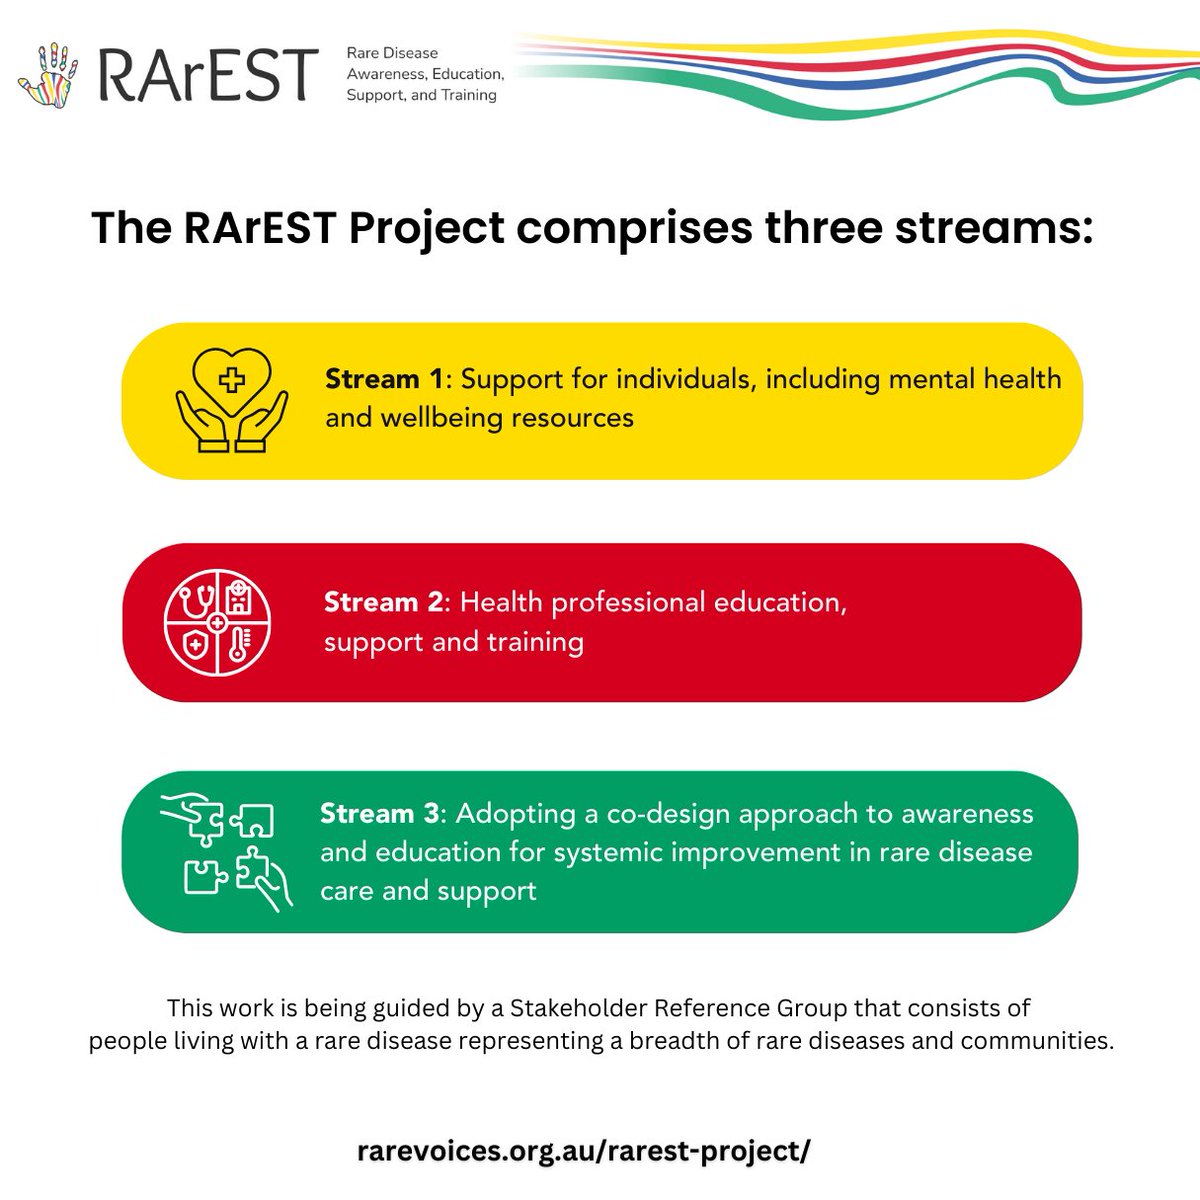 The RArEST Project was funded by the Australian Government to develop and deliver #RareDisease awareness resources, education, support and training. 🌟We will be sharing a selection of the initiative’s deliverables to date in the coming weeks. Read more: rarevoices.org.au/rarest-project/